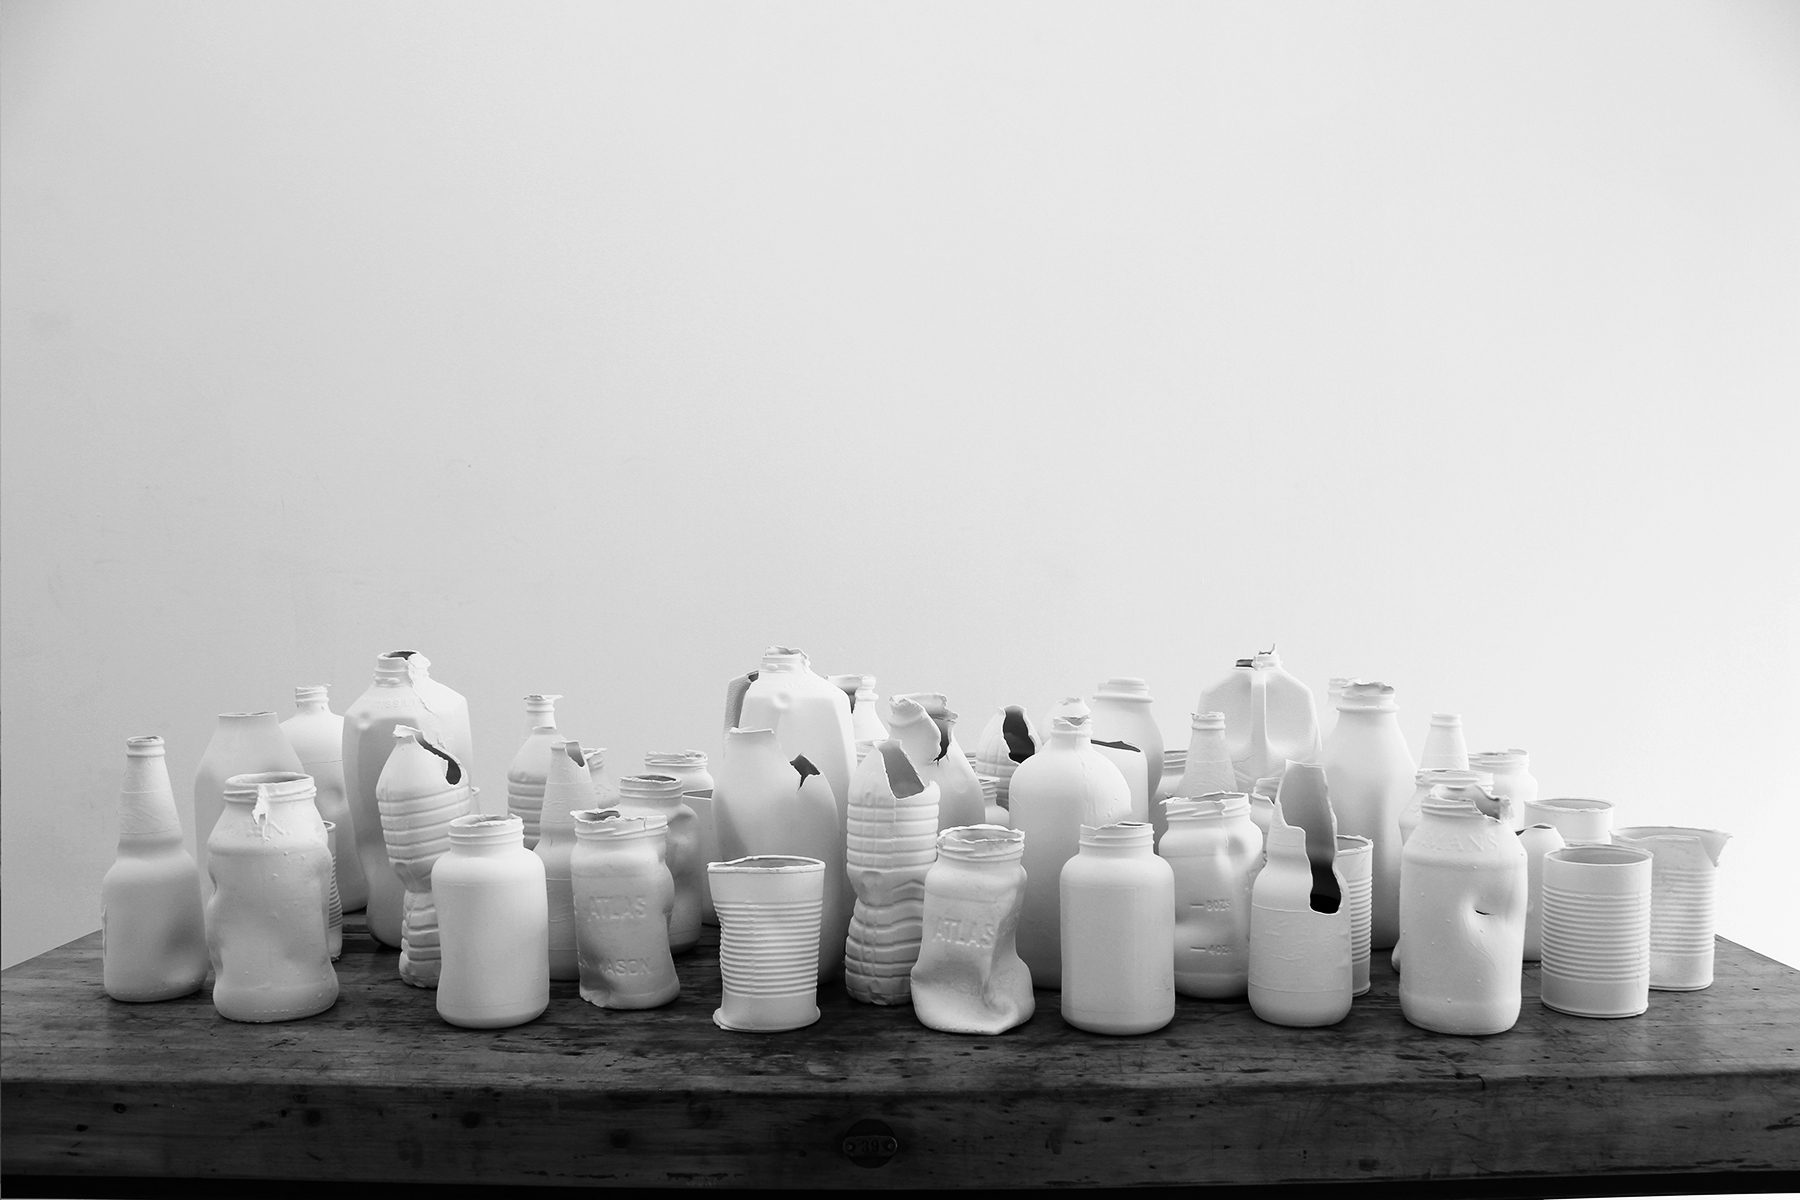 Object: An installation with 50 ceramic interactive pieces